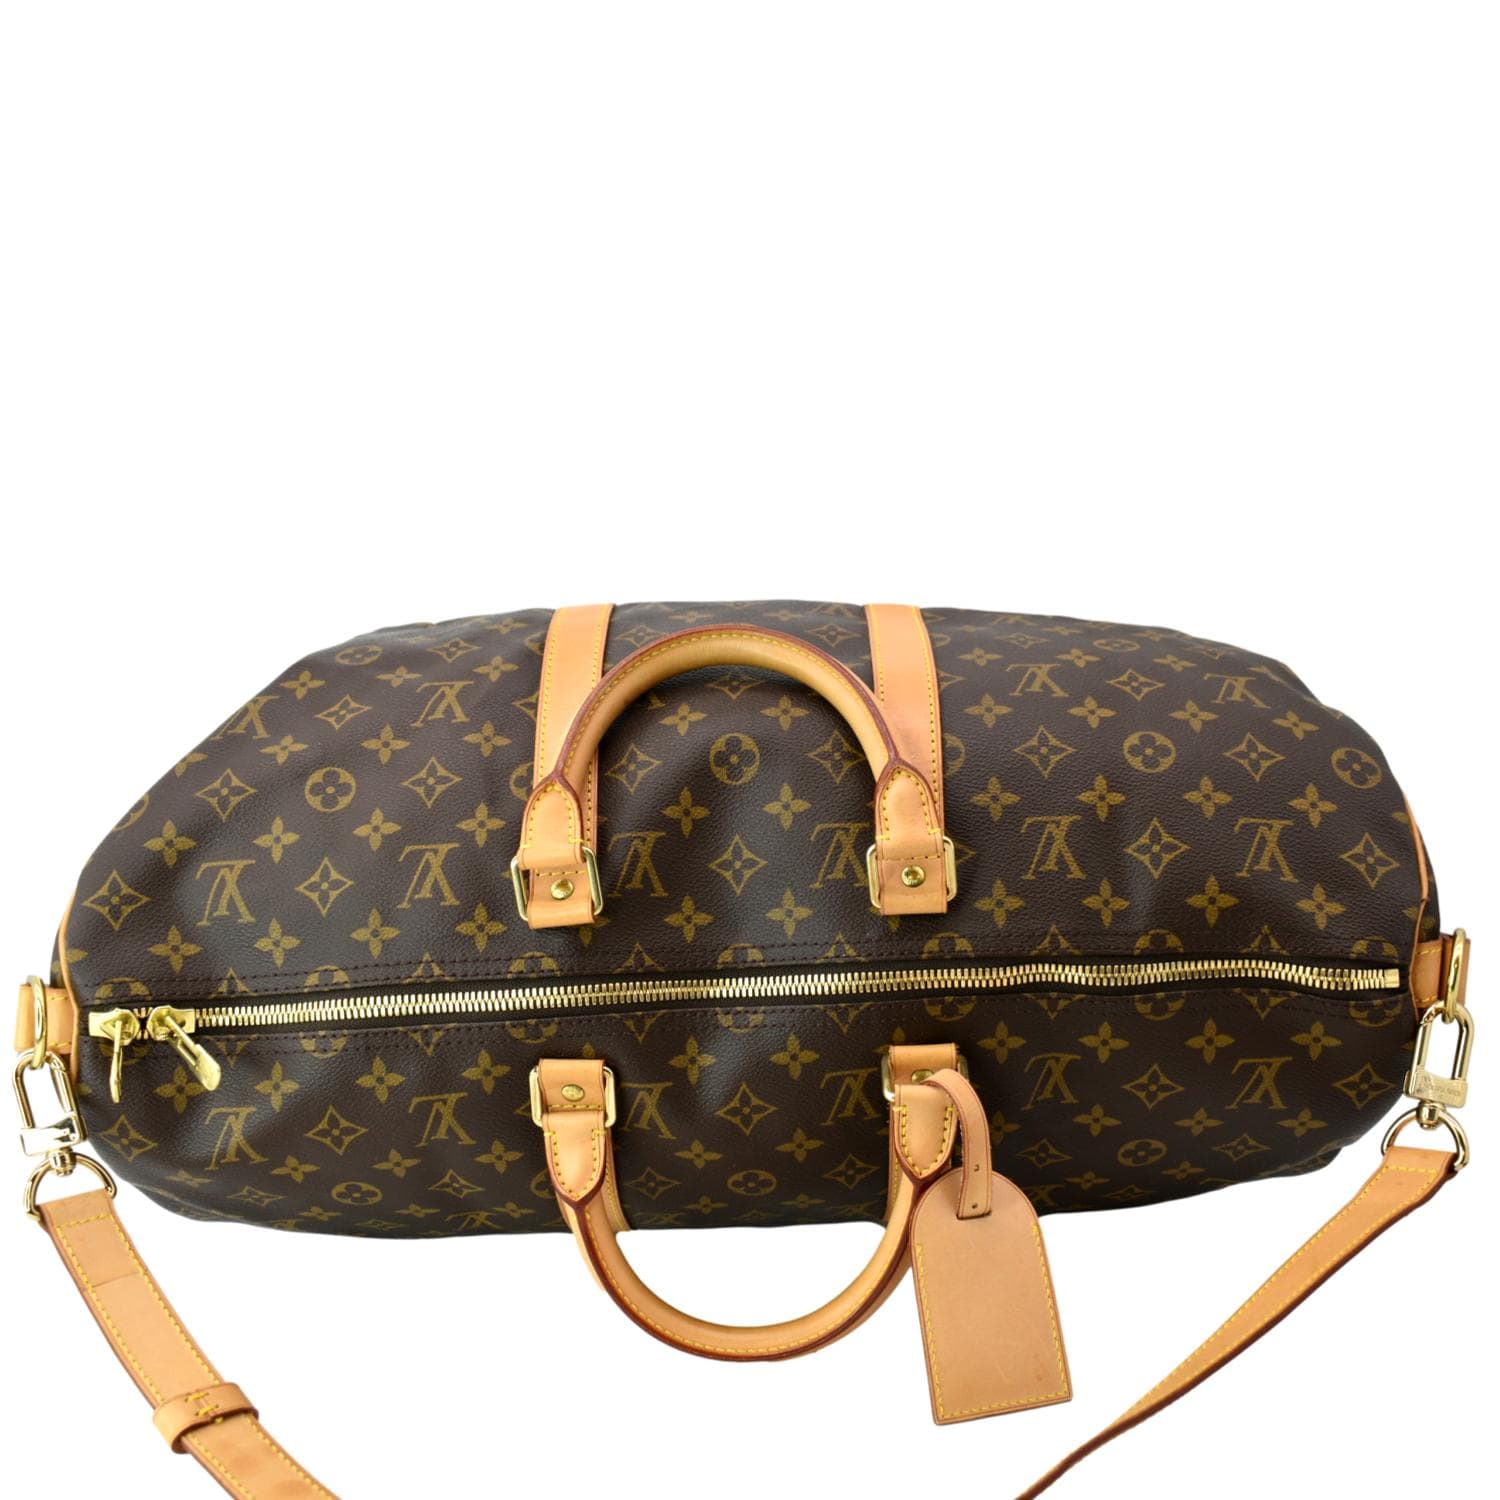 Louis Vuitton Monogram Keepall Bandouliére 50 - Brown Luggage and